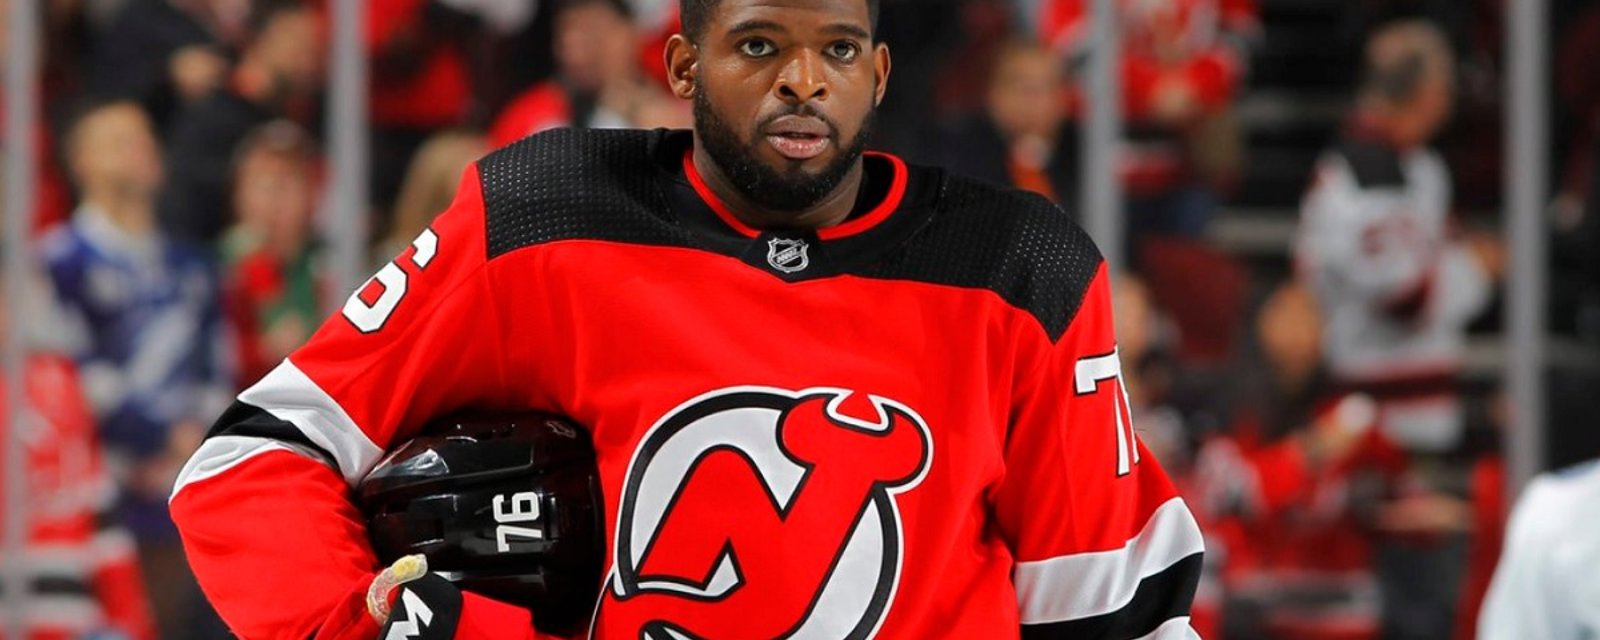 P.K. Subban sends a strong message on the 4th of July.